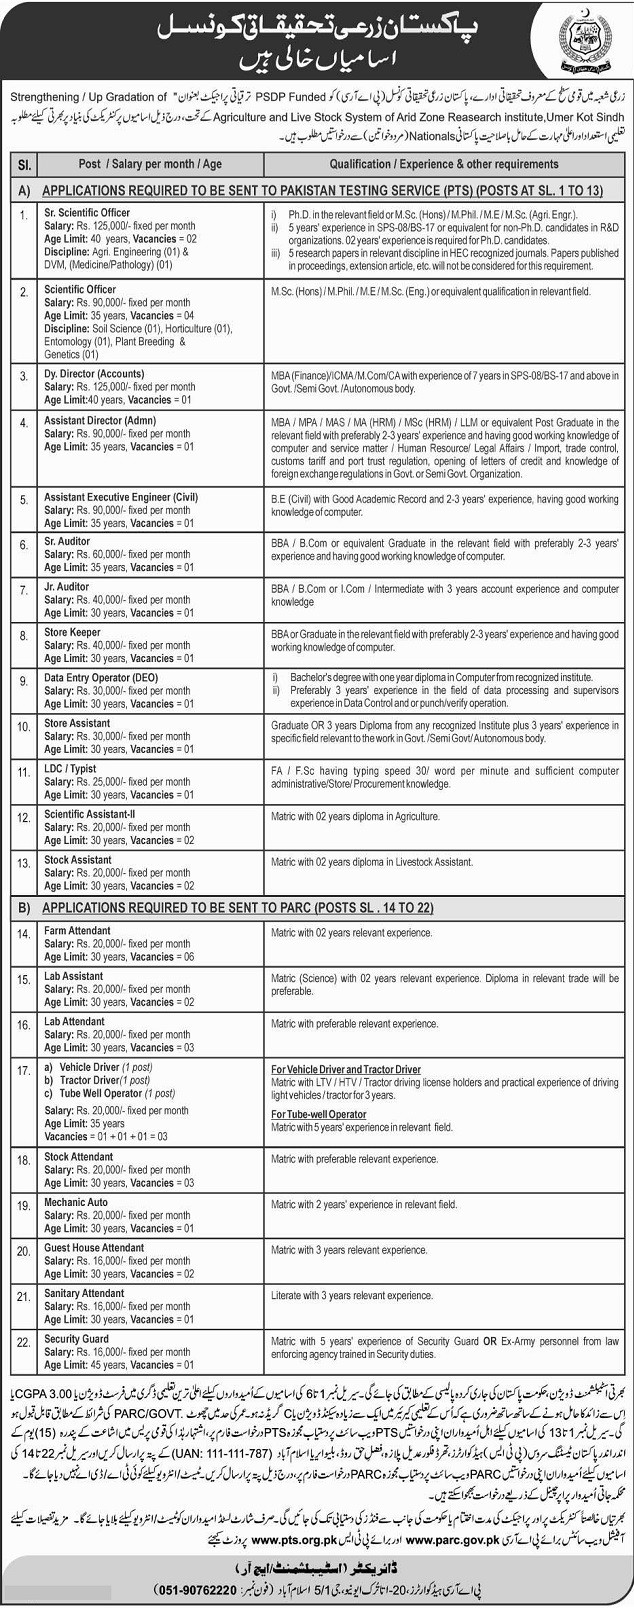 Pakistan Agriculture and Research Council PTS Jobs 2019